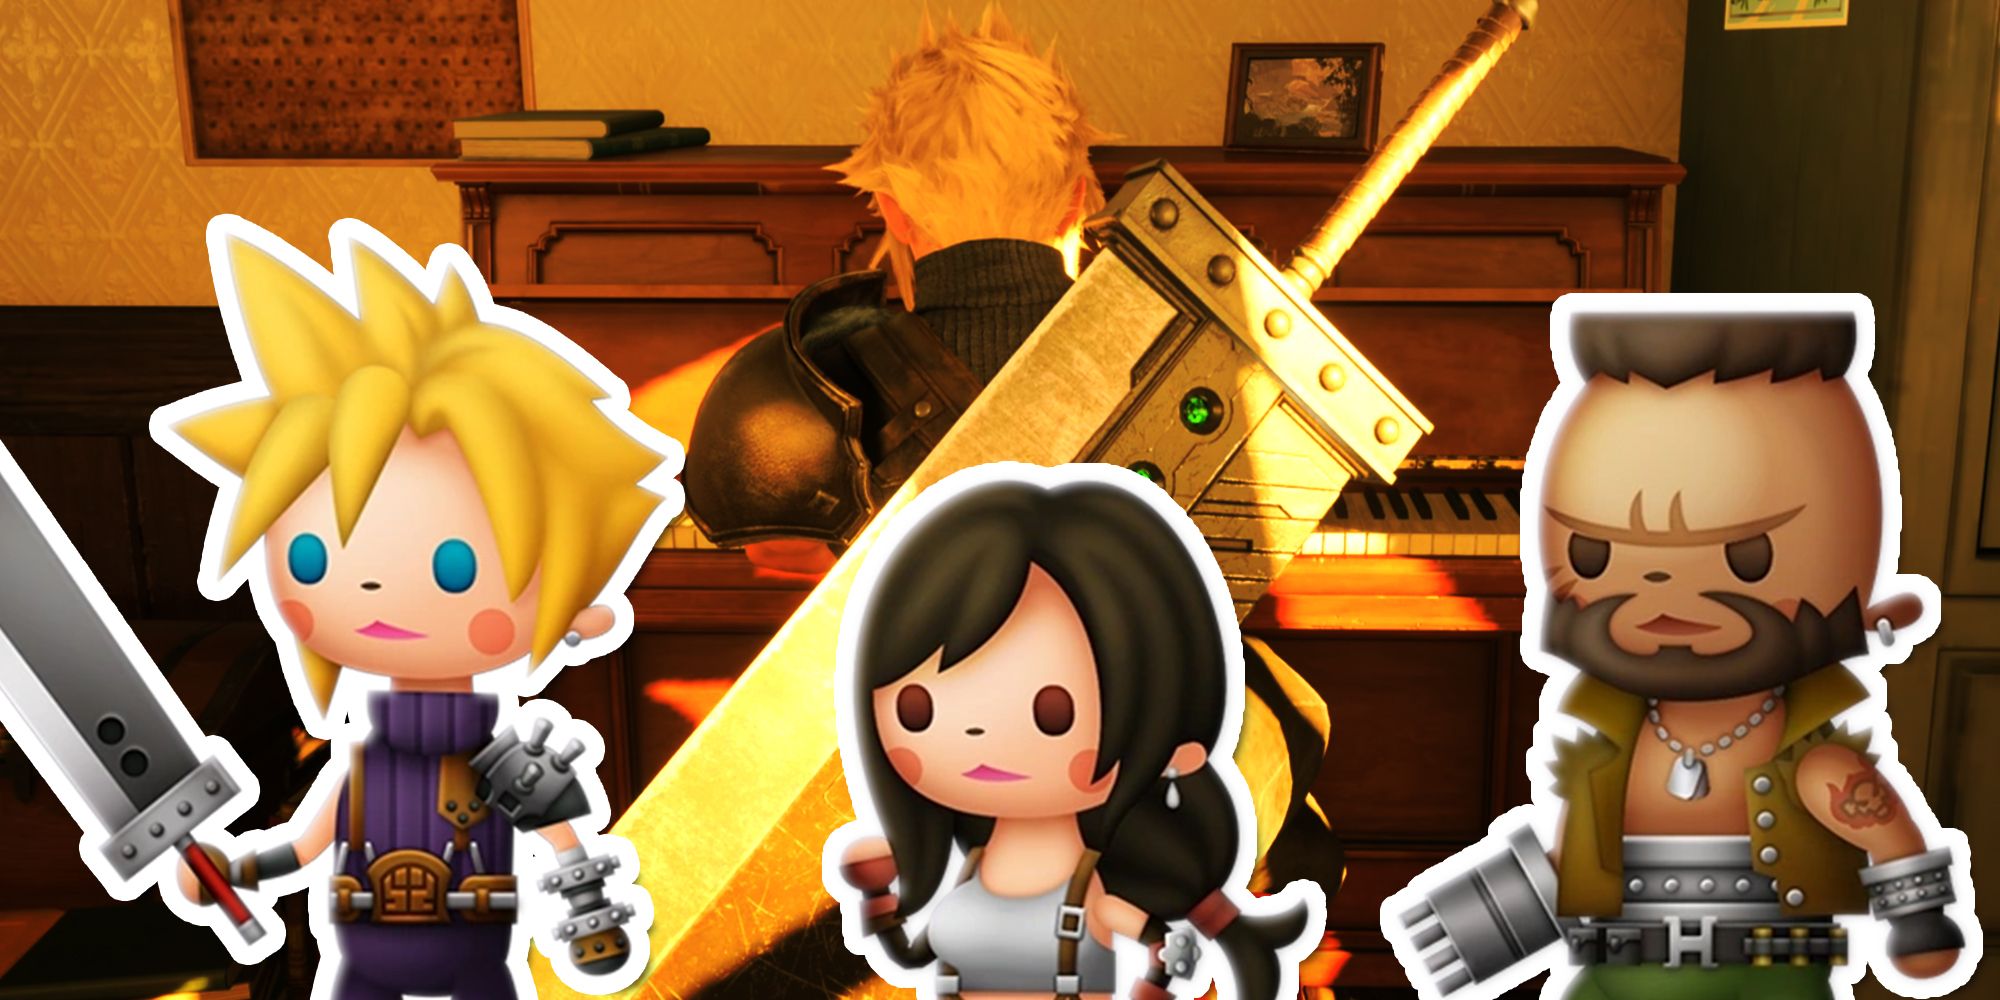 Chibi versions of Cloud, Tifa, and Barrett in front of Final Fantasy 7 Rebirth Cloud playing piano